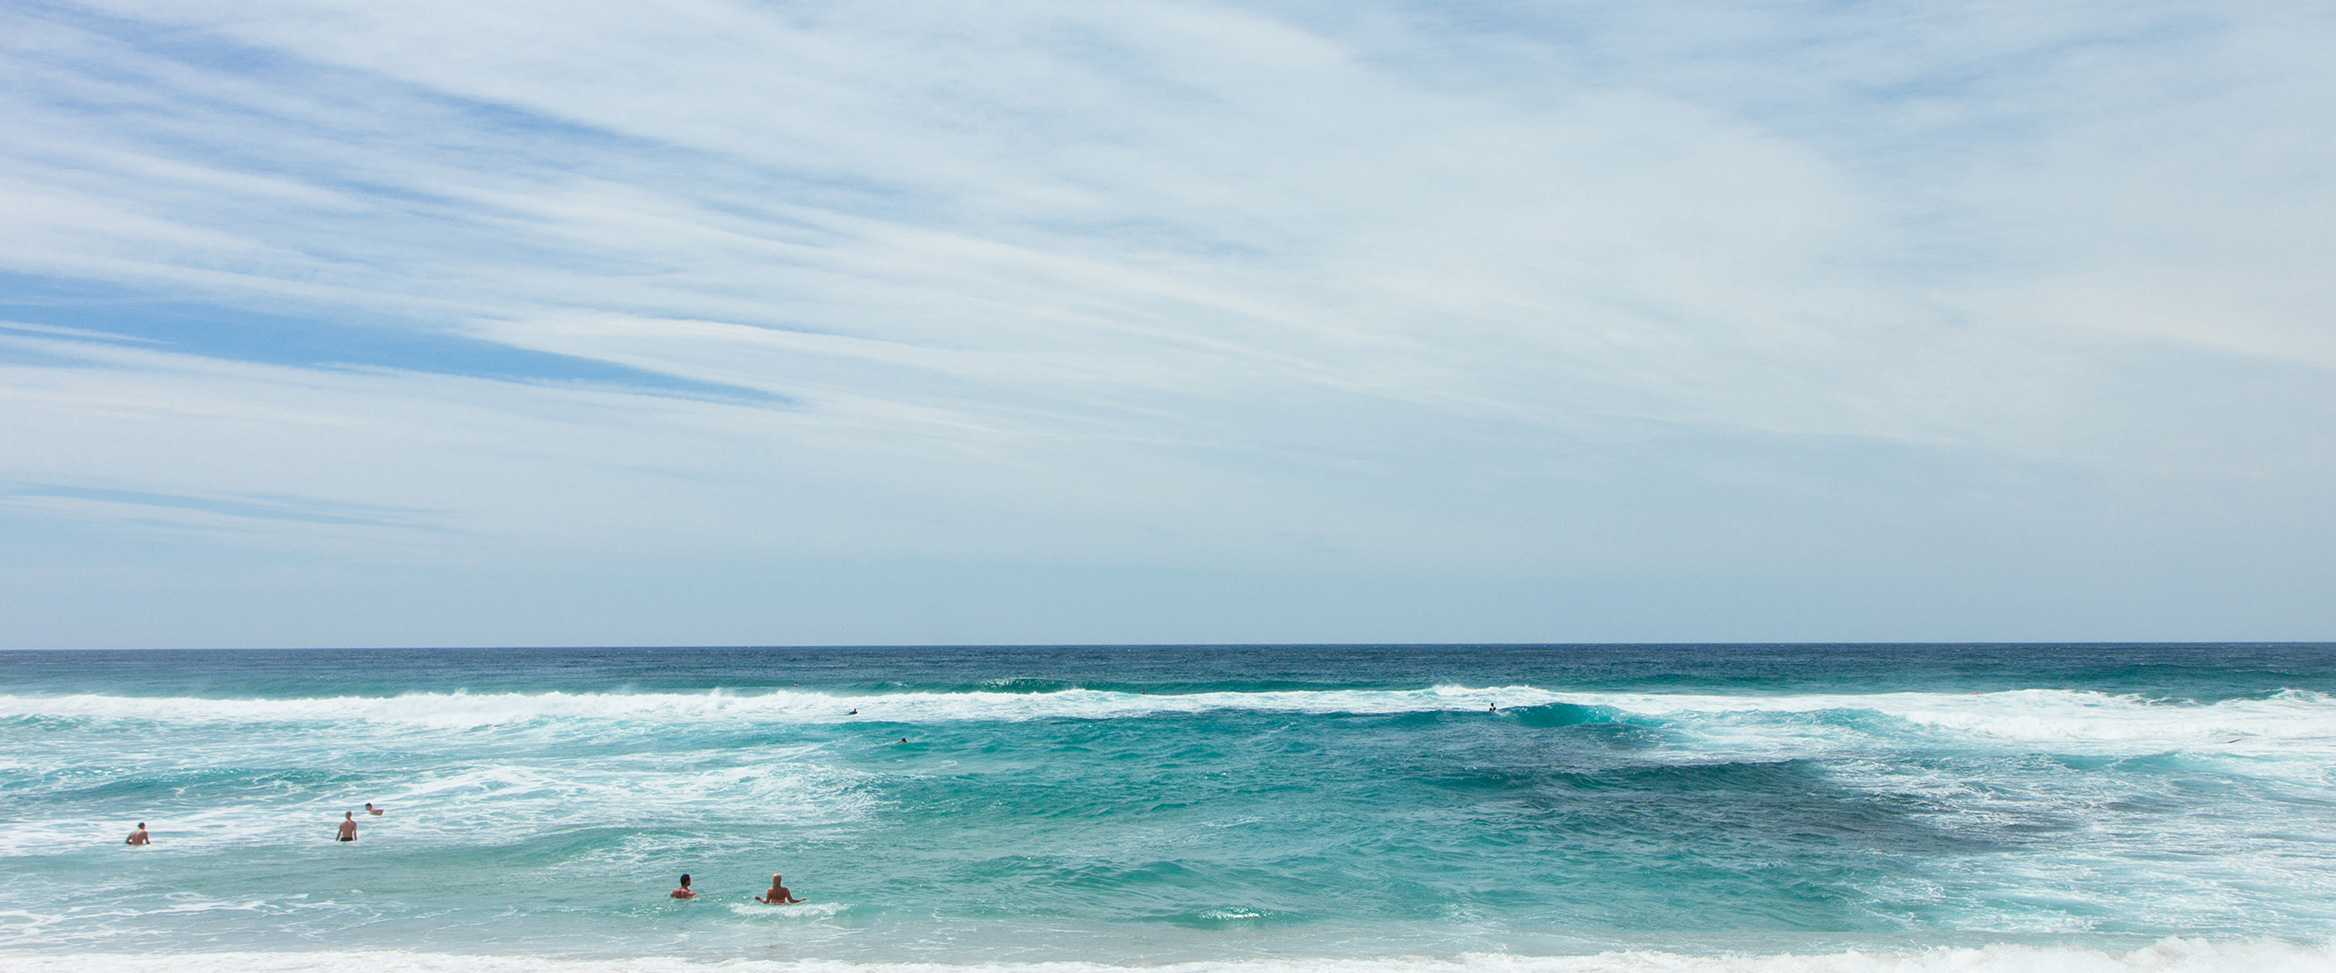 A Bold, Beautiful Day at Bronte